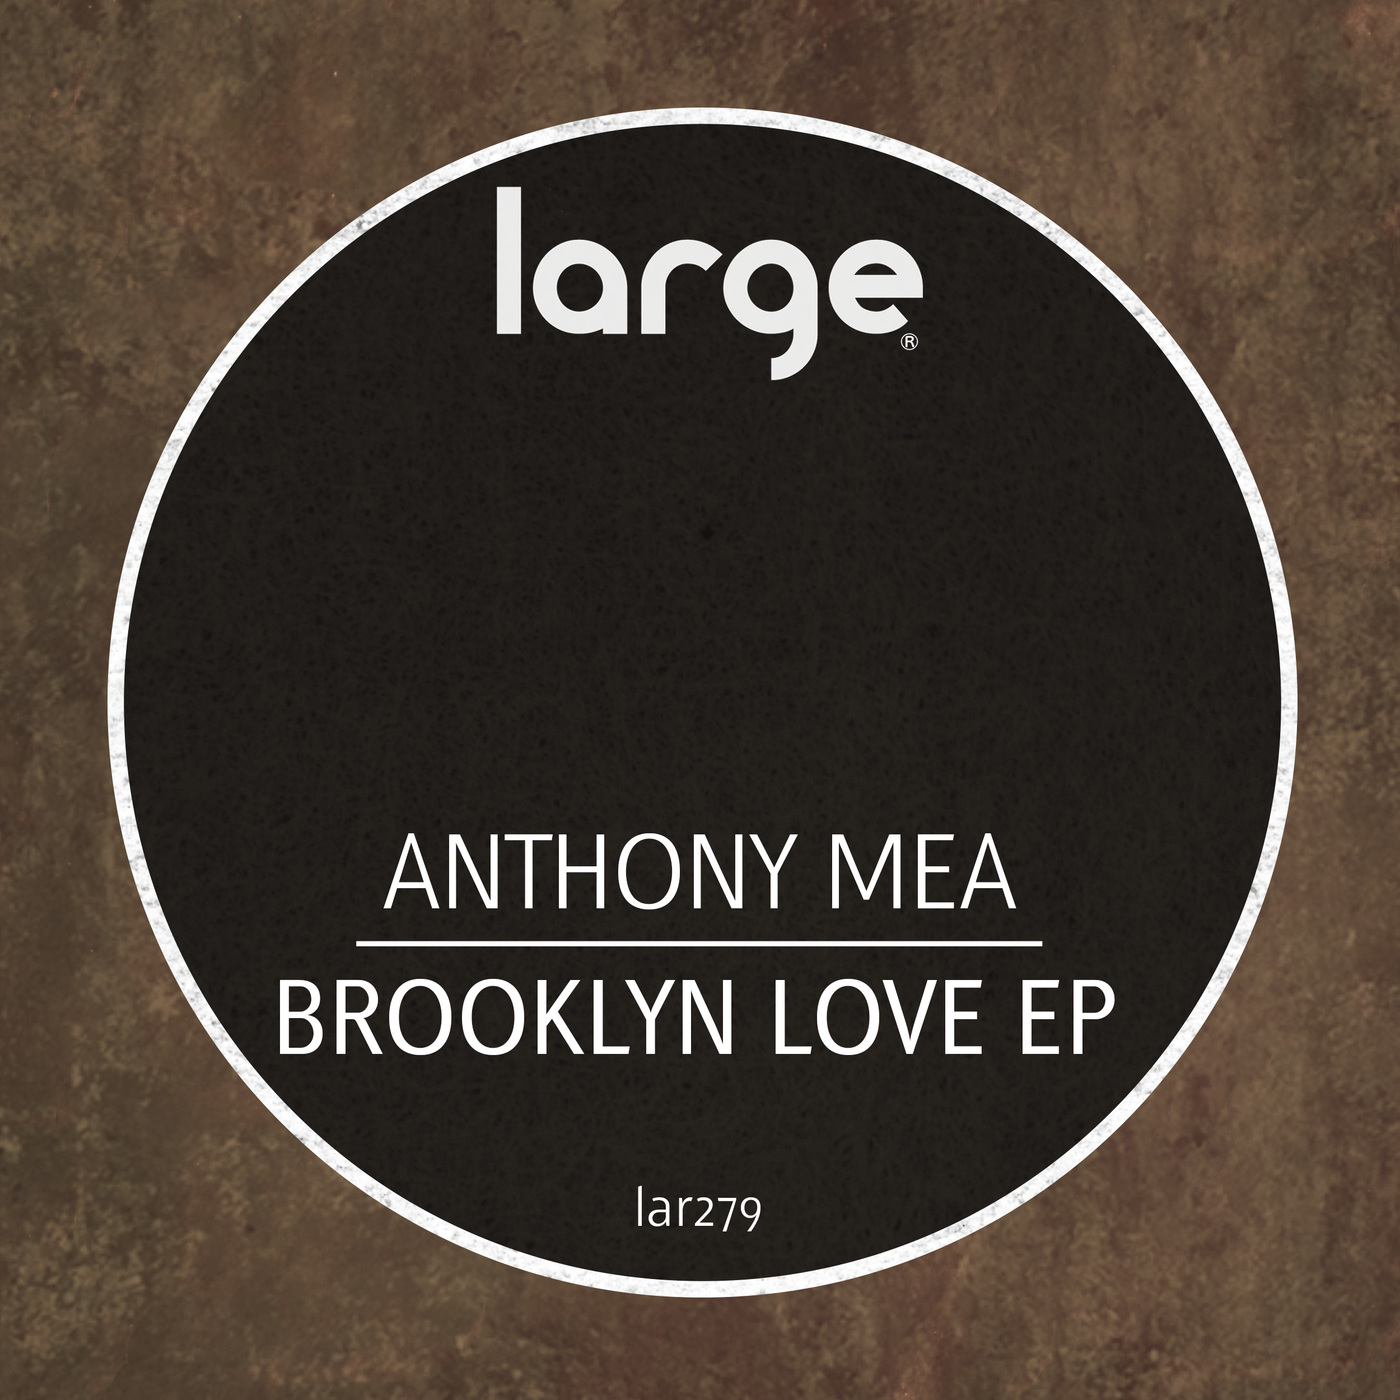 Anthony Mea - Brooklyn Love EP / Large Music